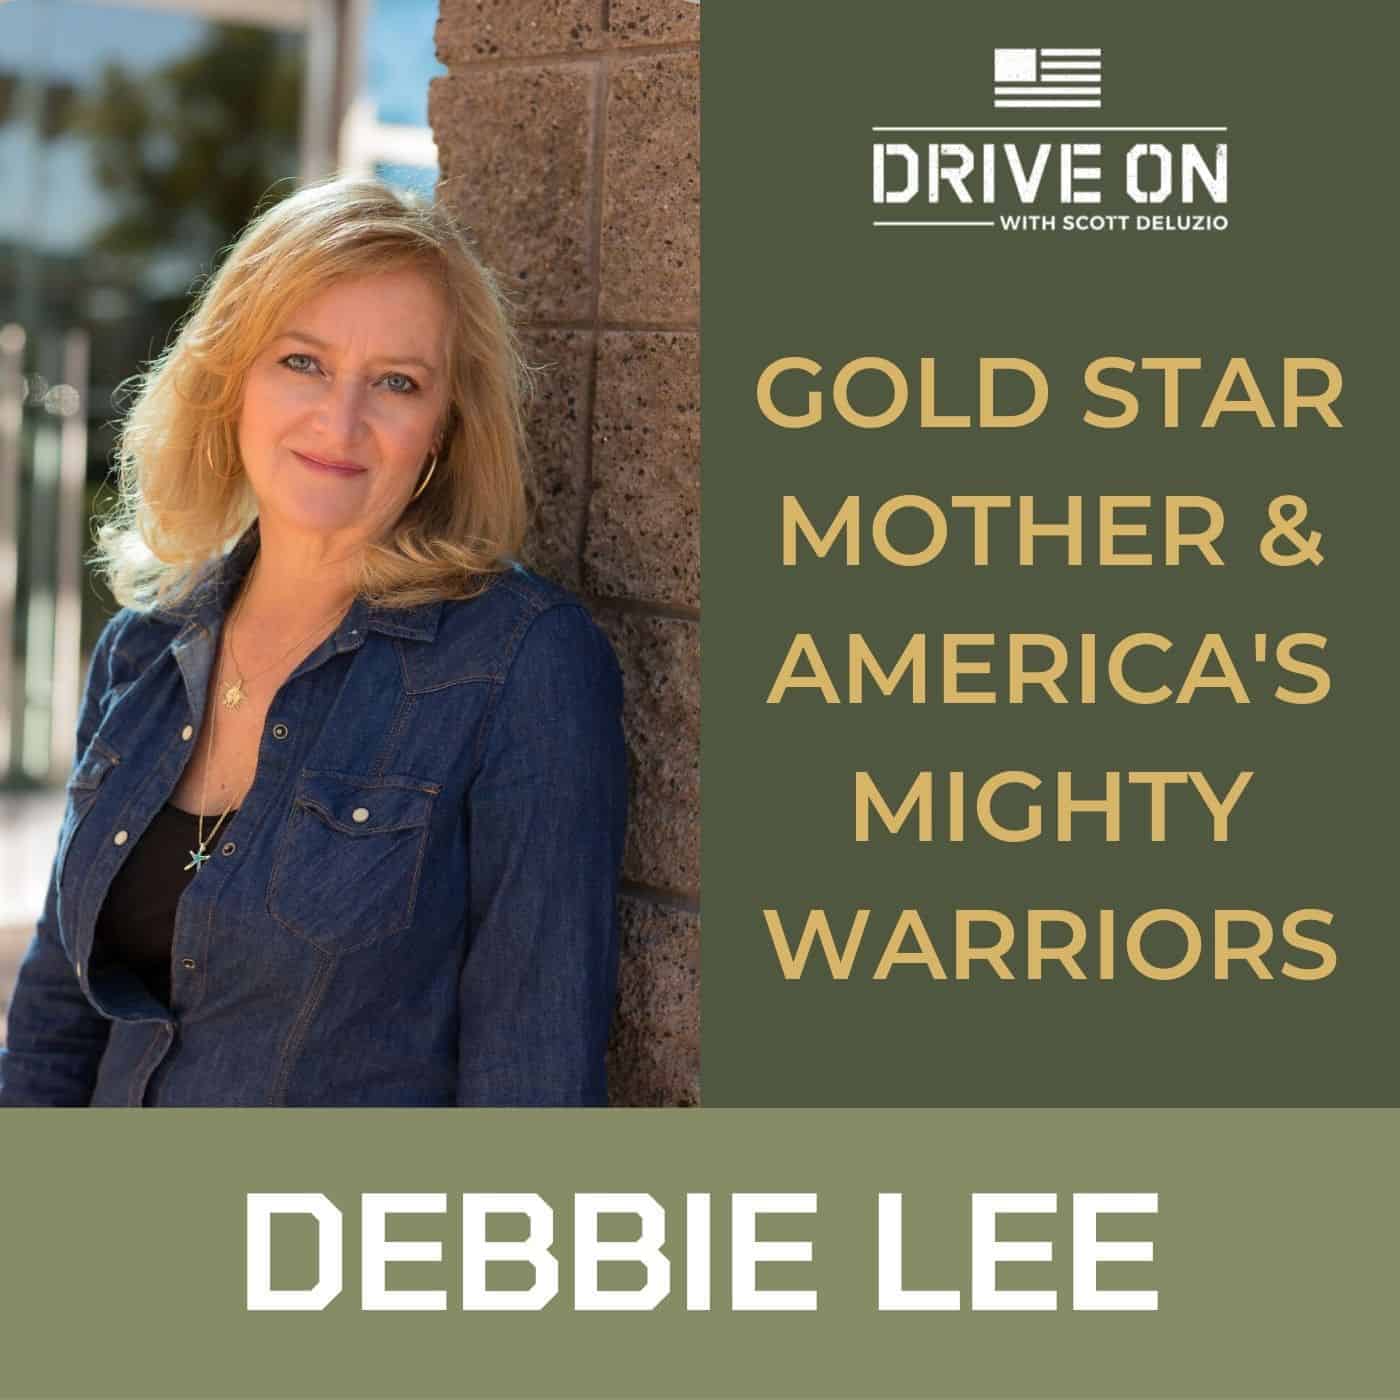 Gold Star Mother & America's Mighty Warriors - Drive On Podcast